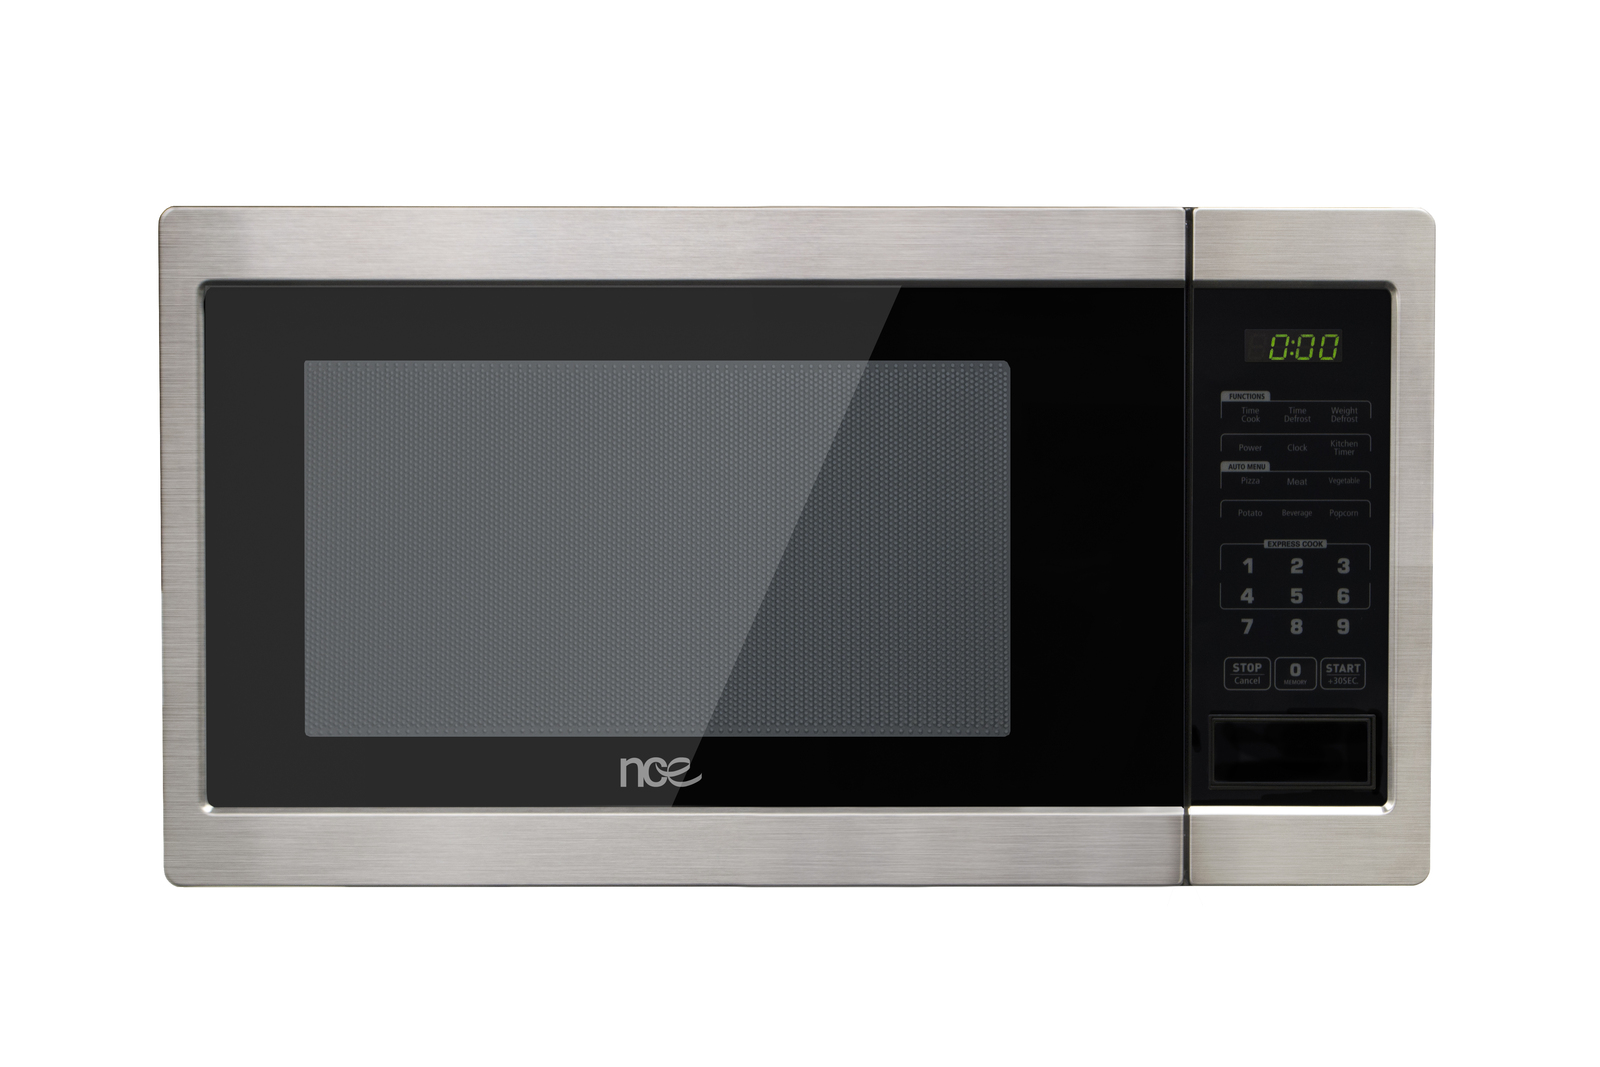 hidden-NCE 23L Flatbed Microwave Oven